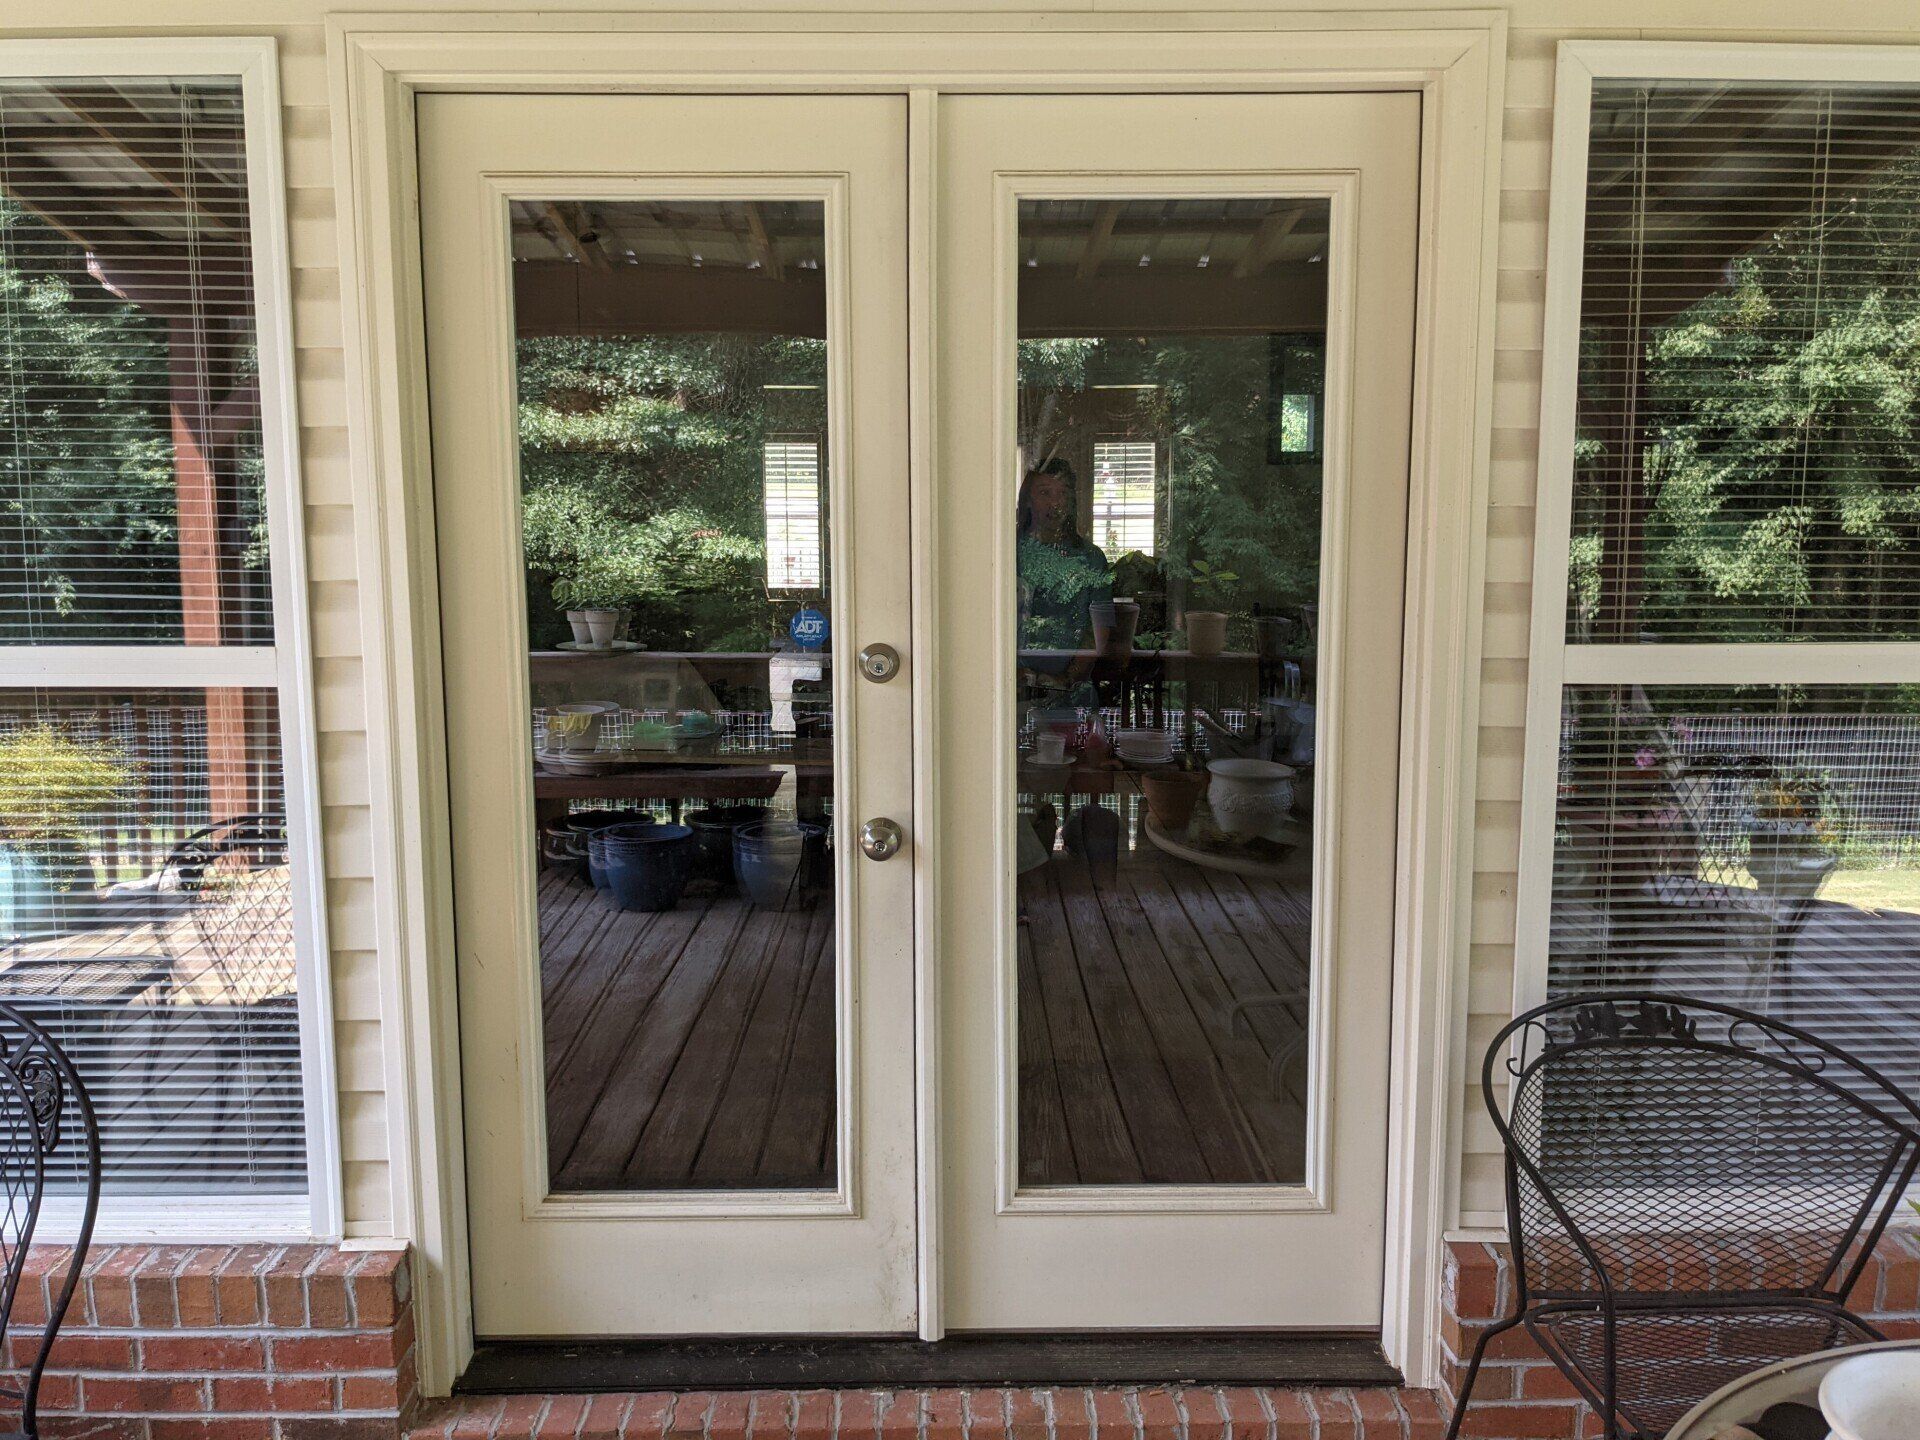 Home improvement incentives for glass doors - Before SPF Residential Tint Blocked Heat Gain & UV-Sun Damage in Wetumpka, AL